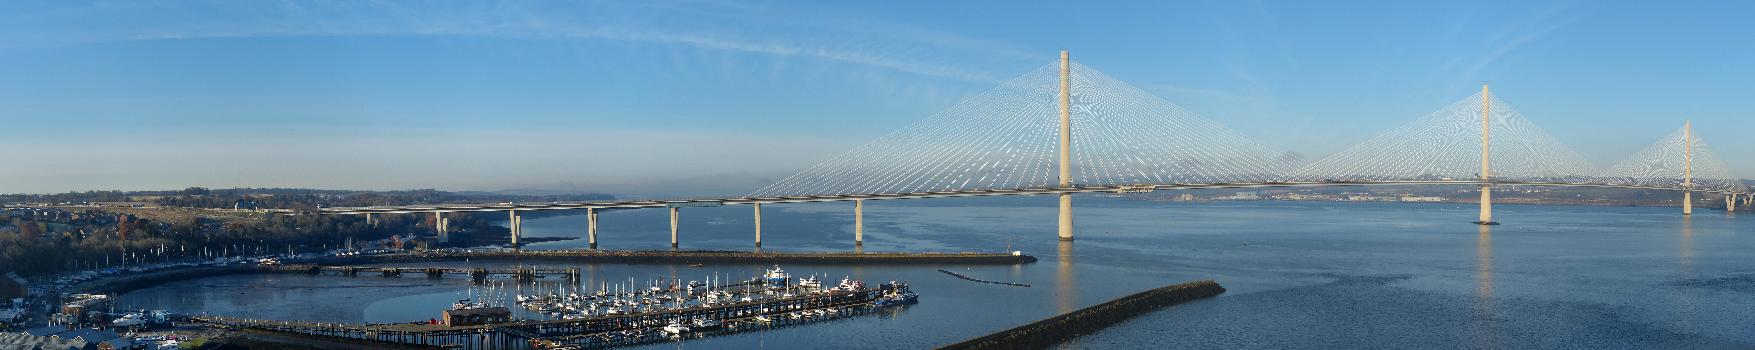 Panorama of the Queensferry Crossing from the Forth Road Bridge with Port Edgar